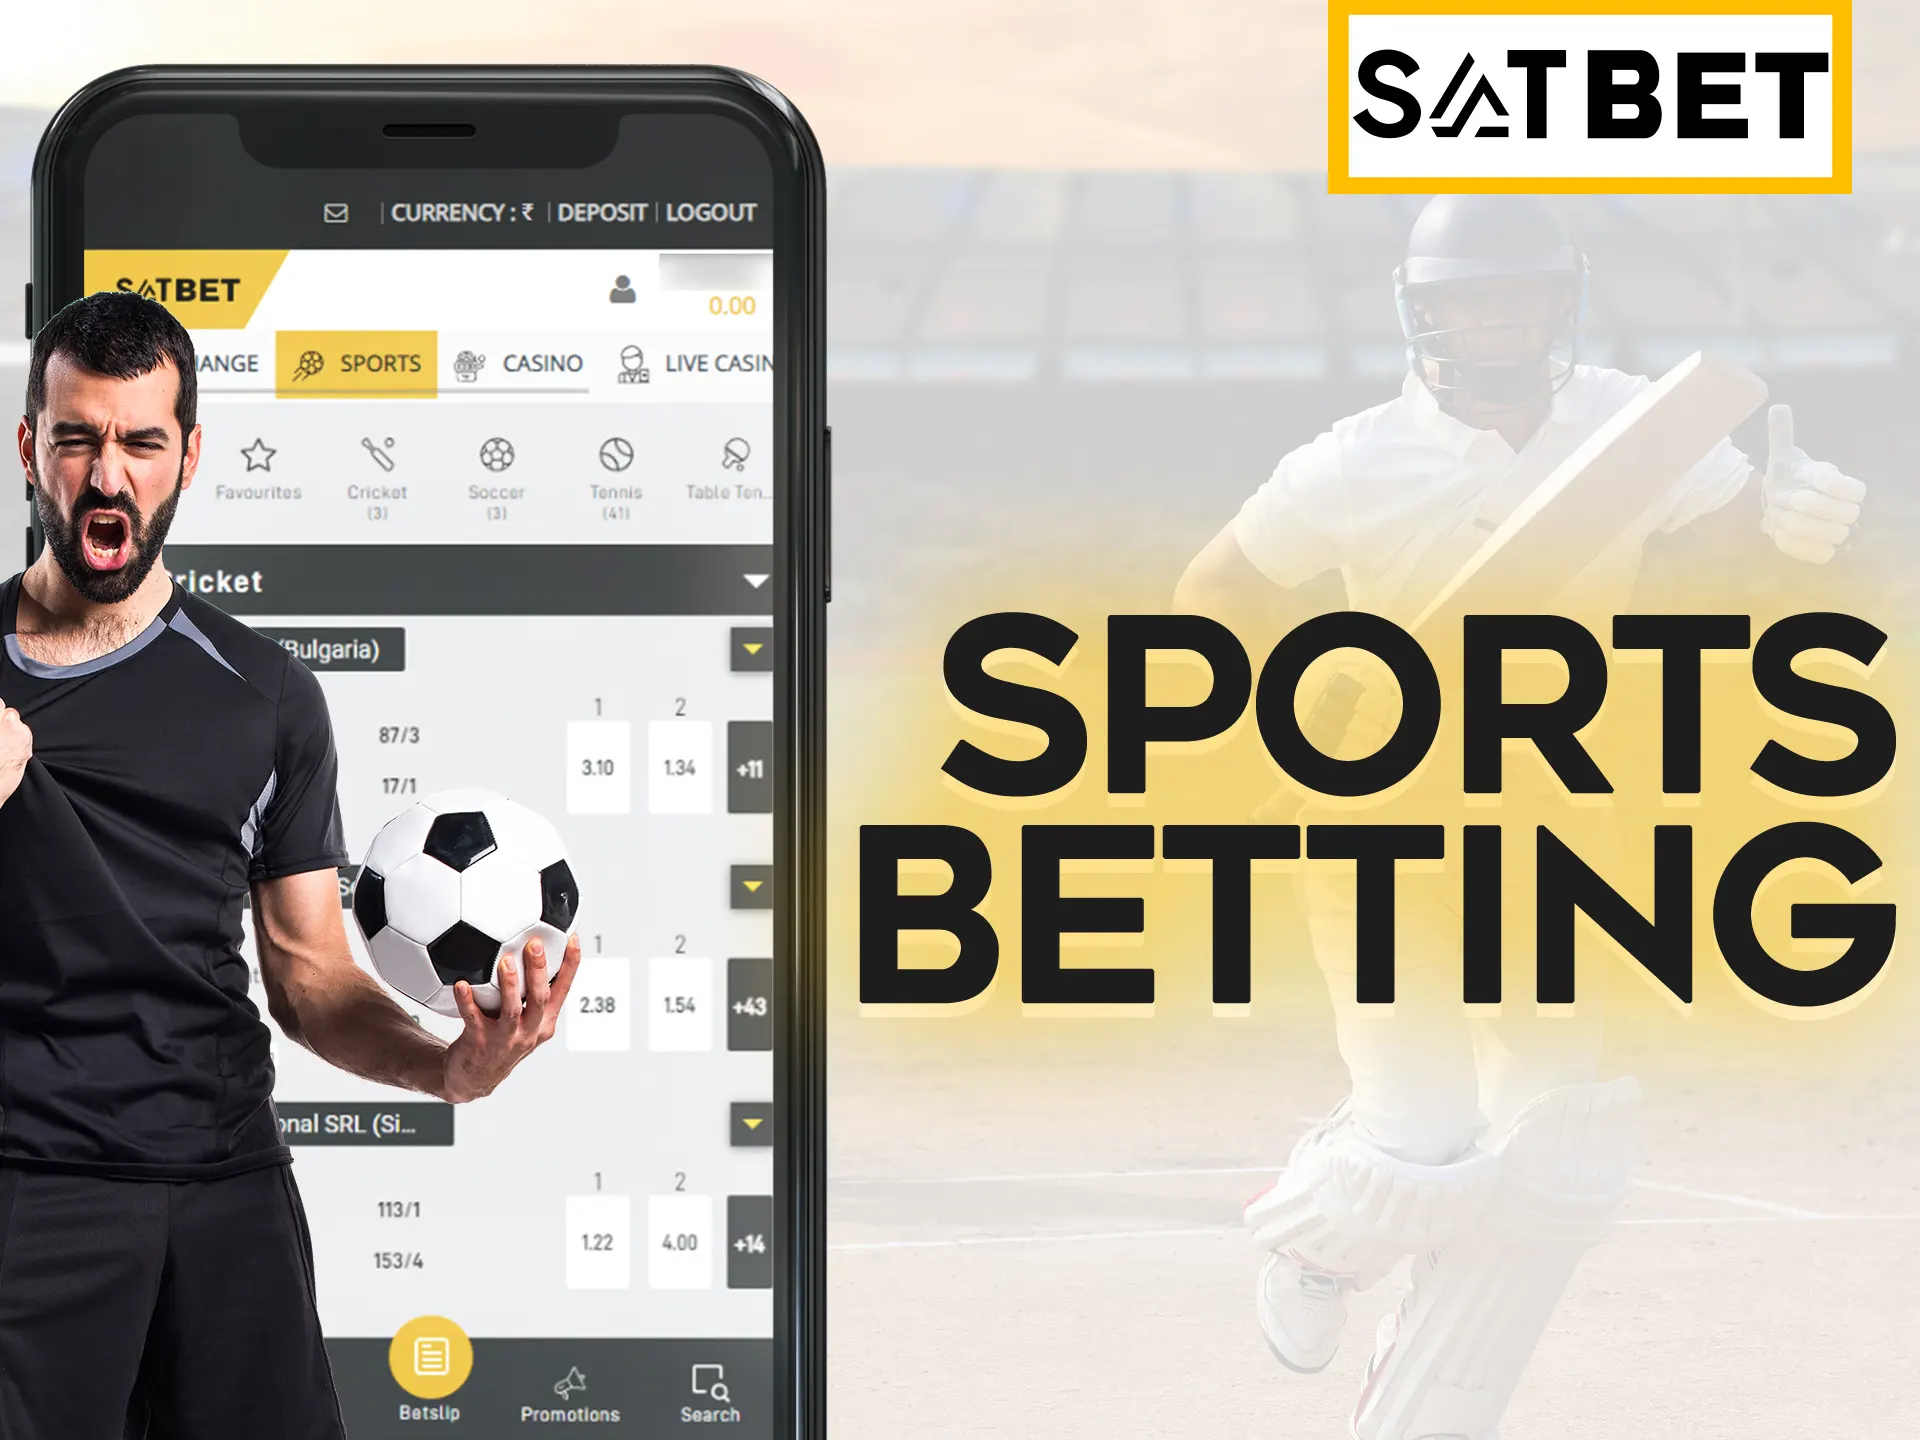 Bet on sports in Satbet app and win money.